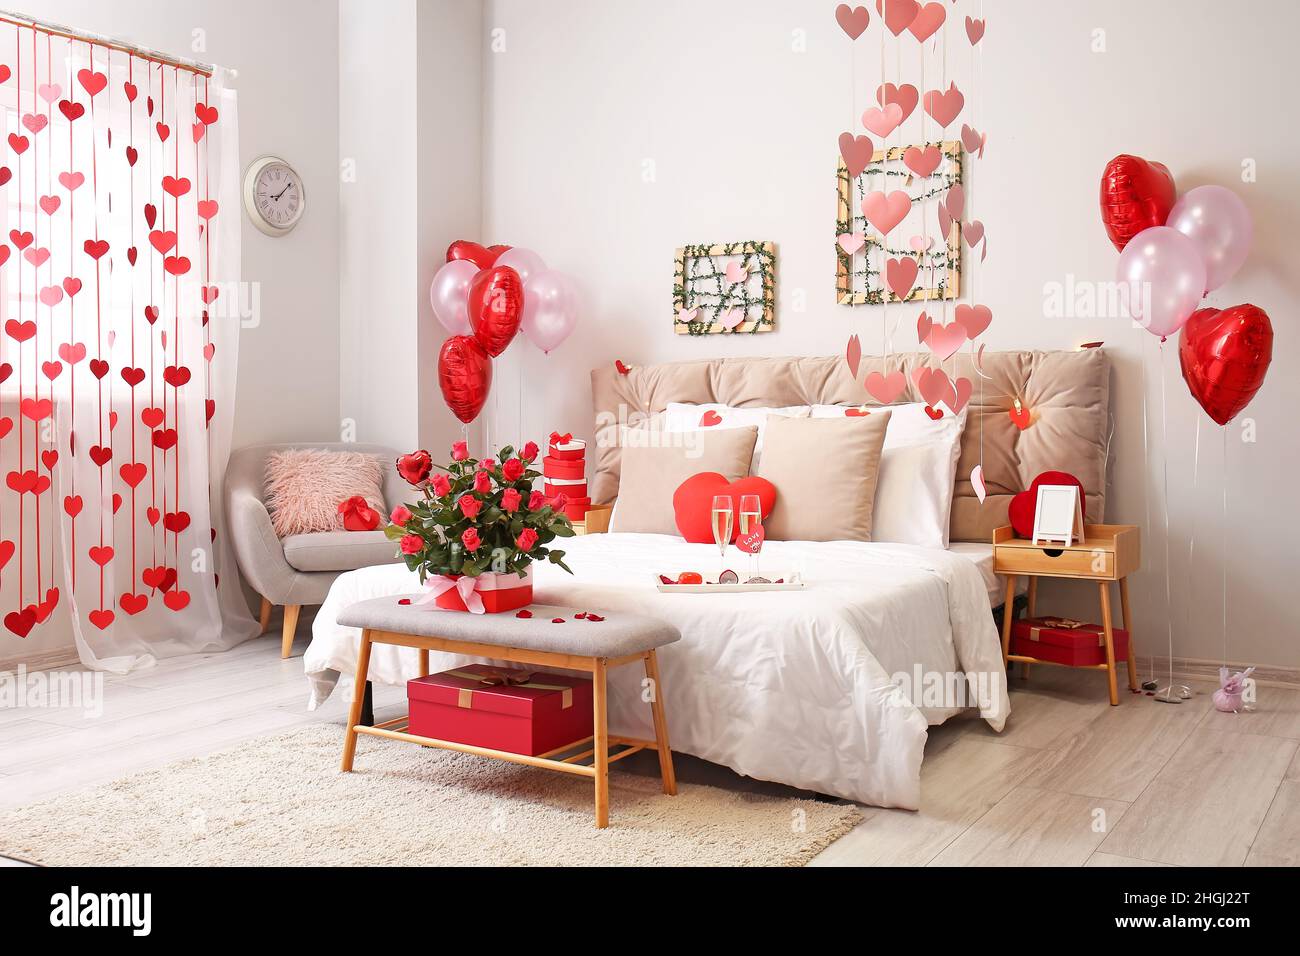 Interior of beautiful bedroom with roses, glasses of champagne and ...